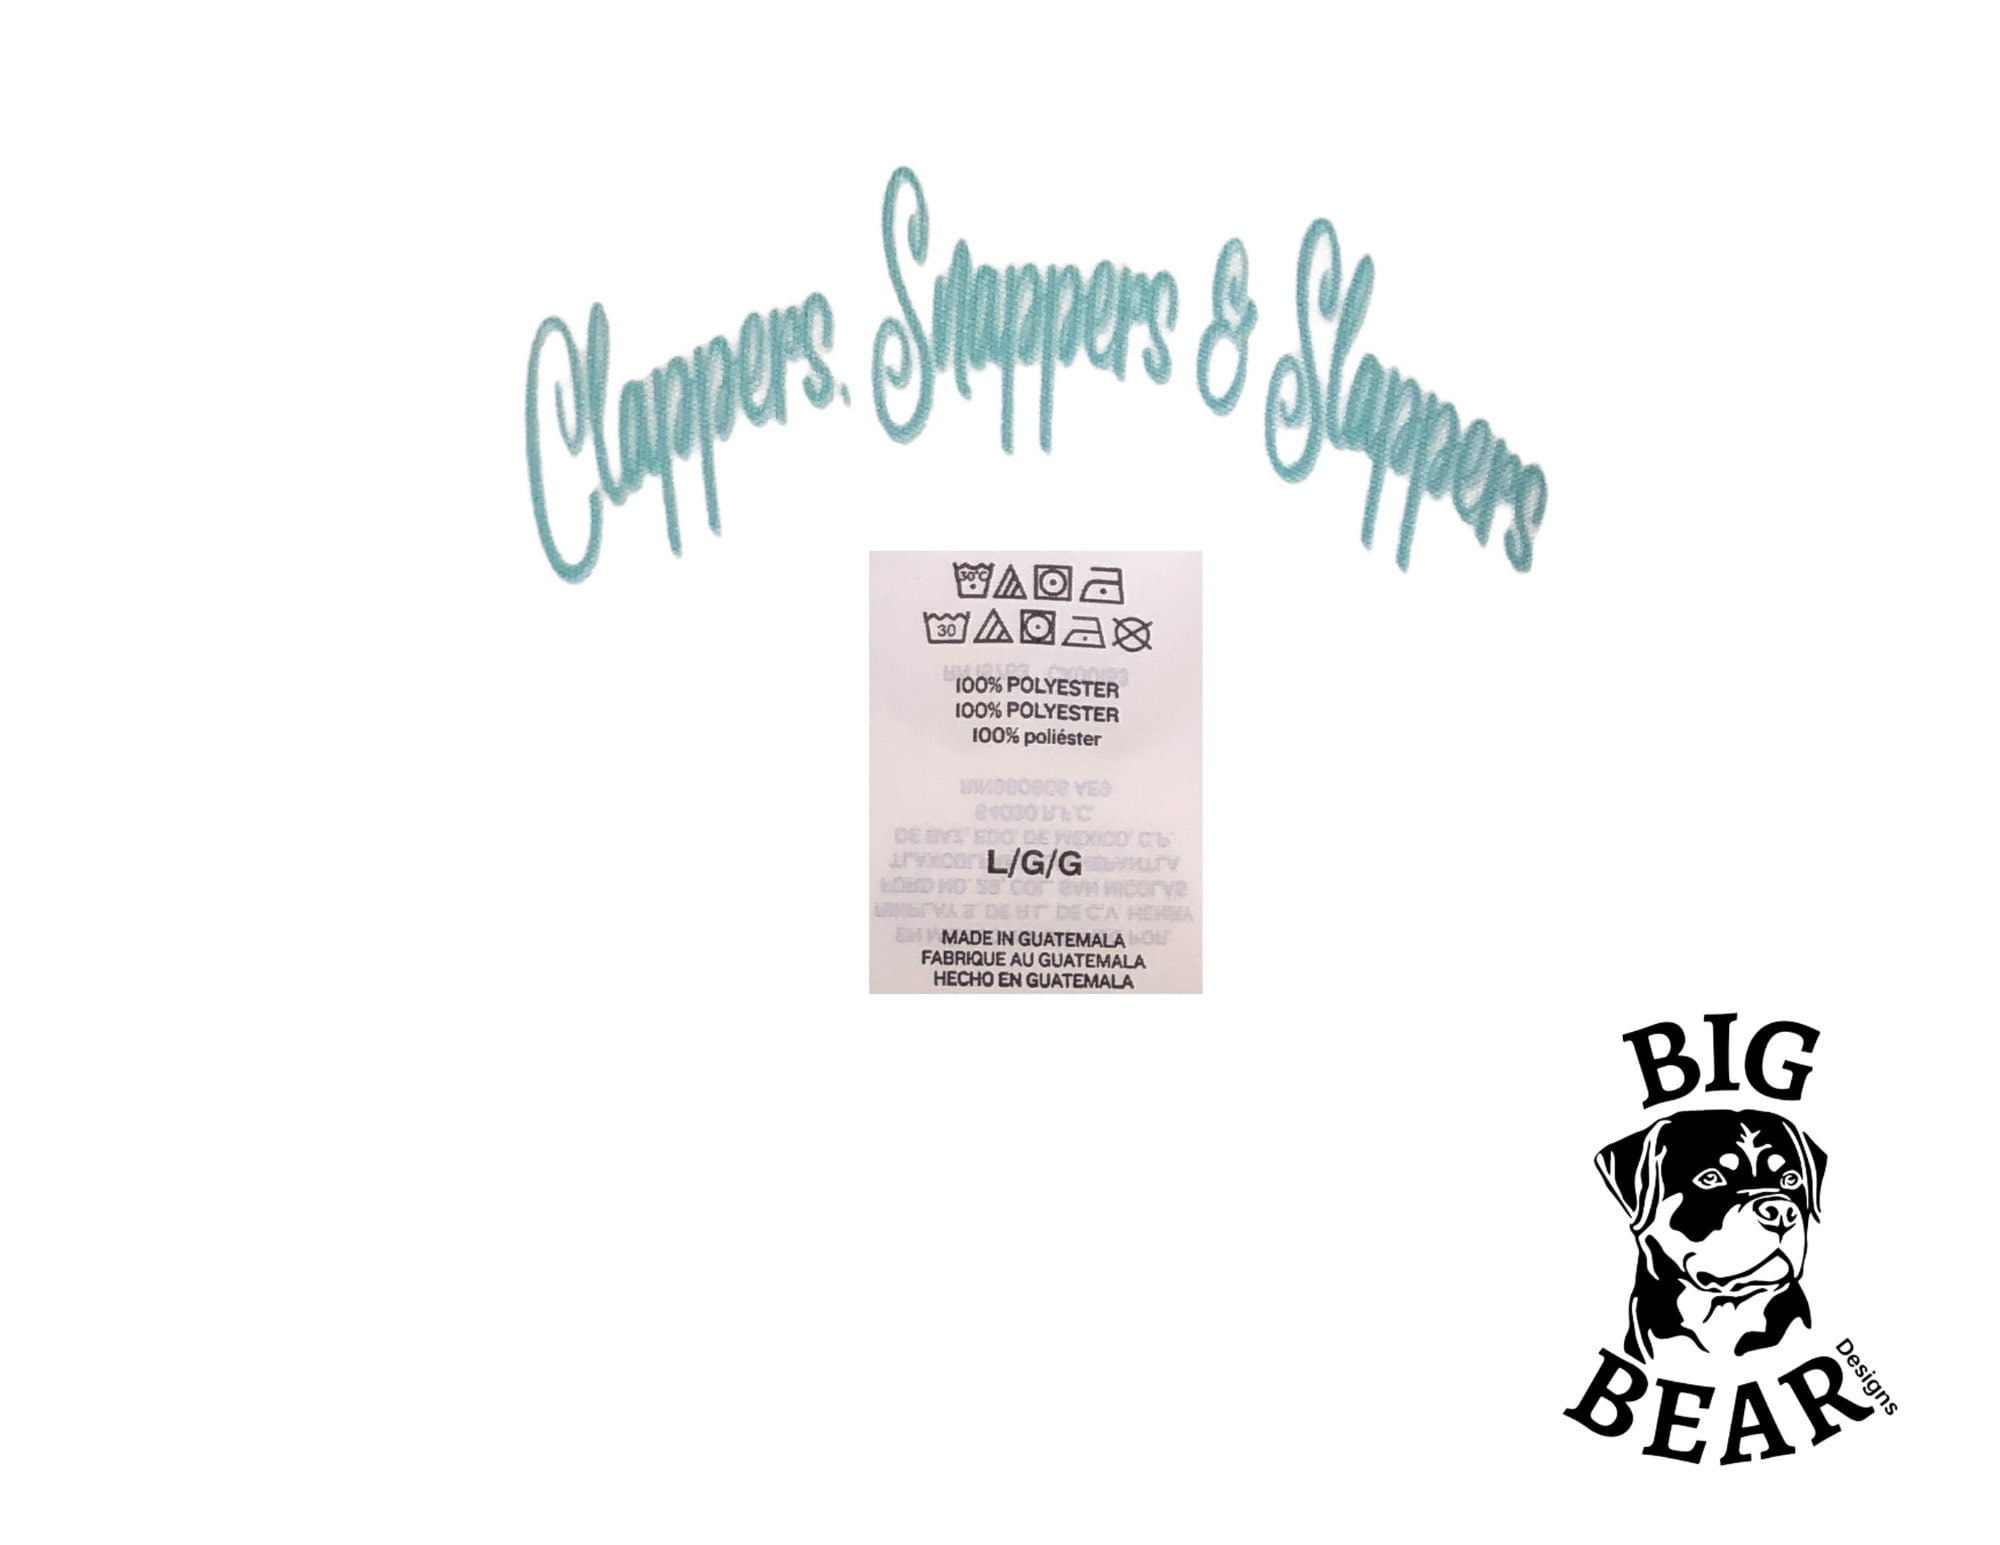 Clapper, Snappers & Slappers - Snapper / Designs by Big Bear